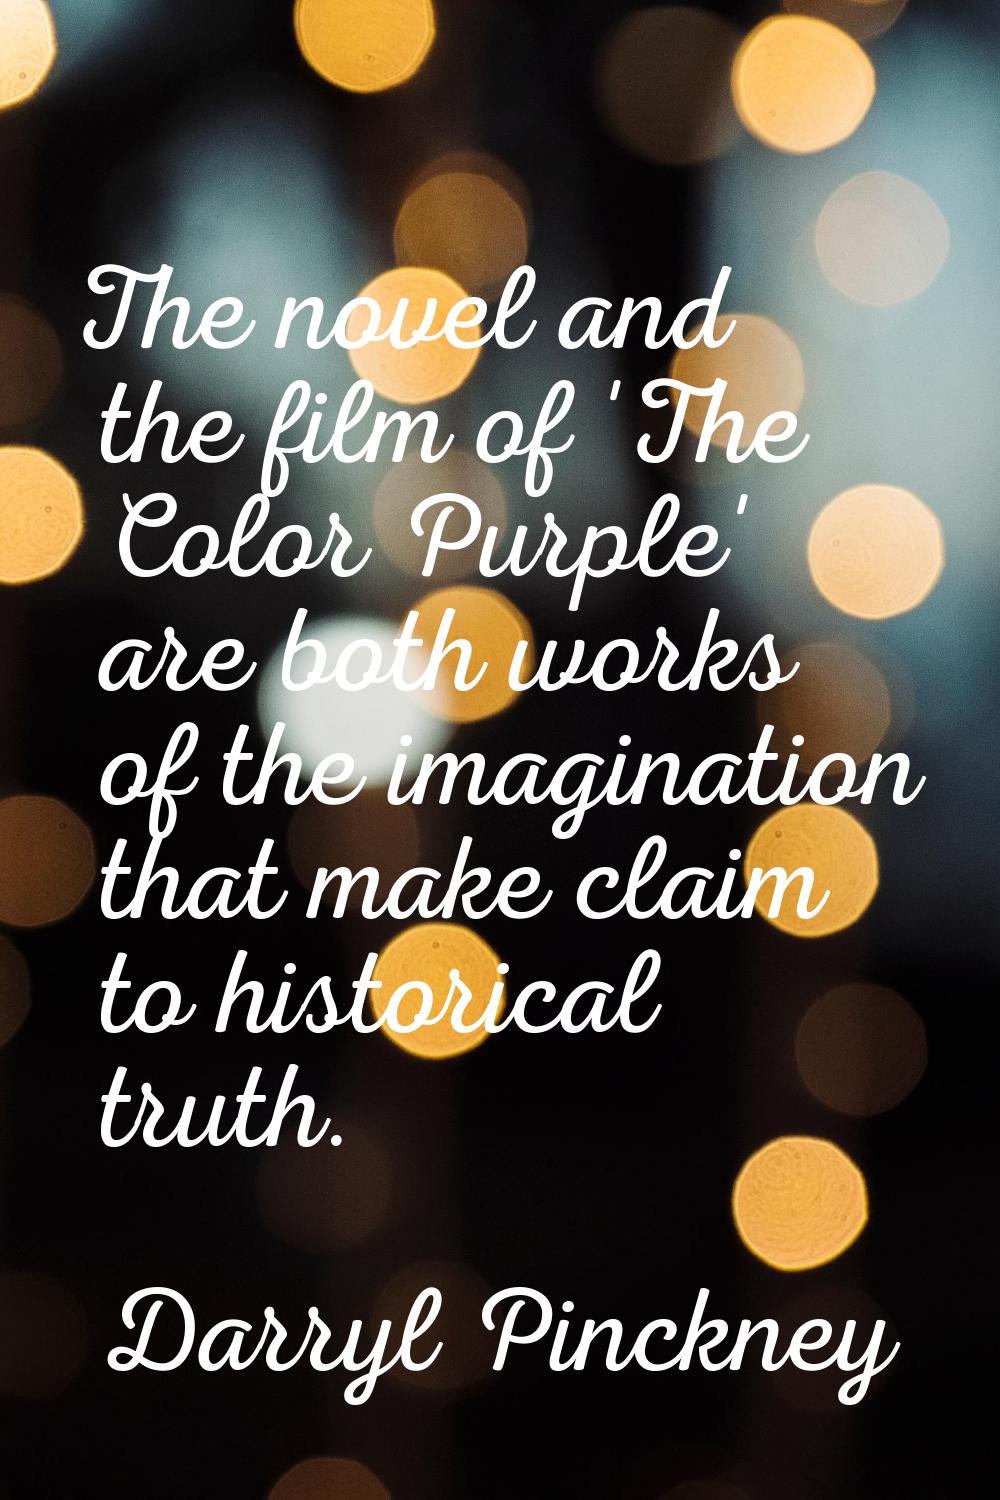 The novel and the film of 'The Color Purple' are both works of the imagination that make claim to h